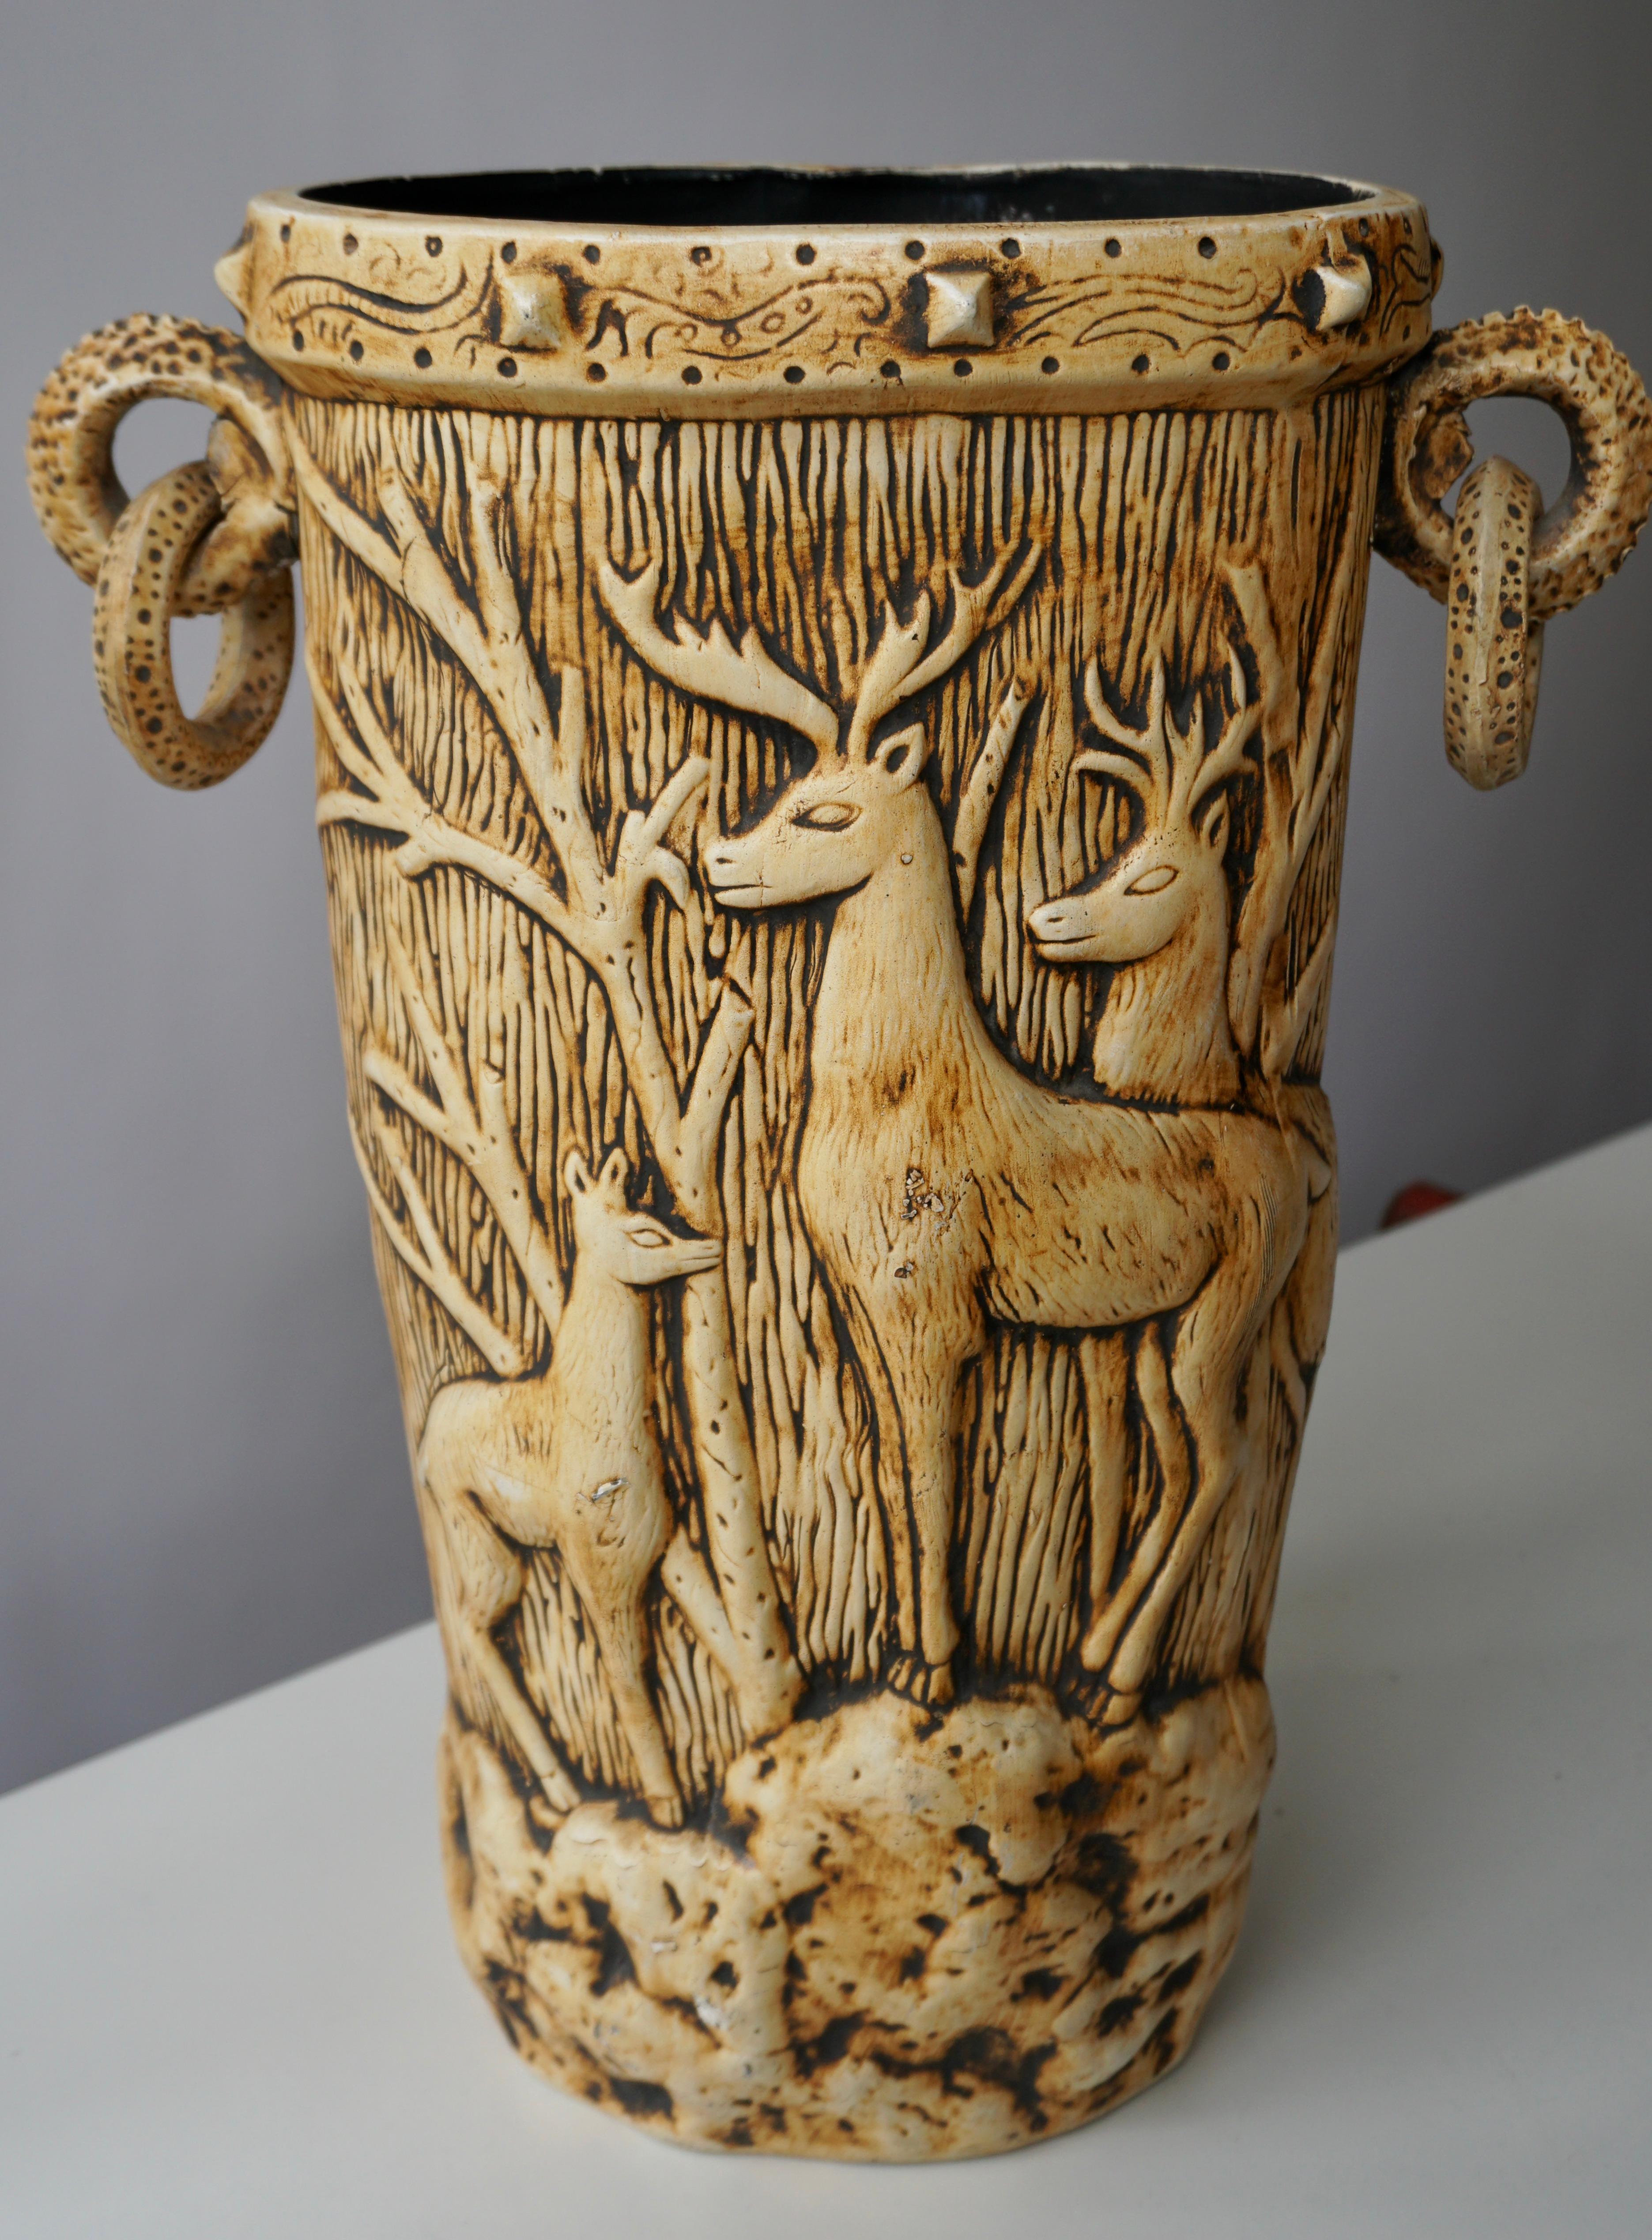 A highly unusual plaster vase with several deer standing on rocks with trees.
Can also be used as an umbrella stand or simply as a decorative object.

Measures: Height 47 cm. Depth 19 cm. Width 37 cm.
Weight 4 kg.